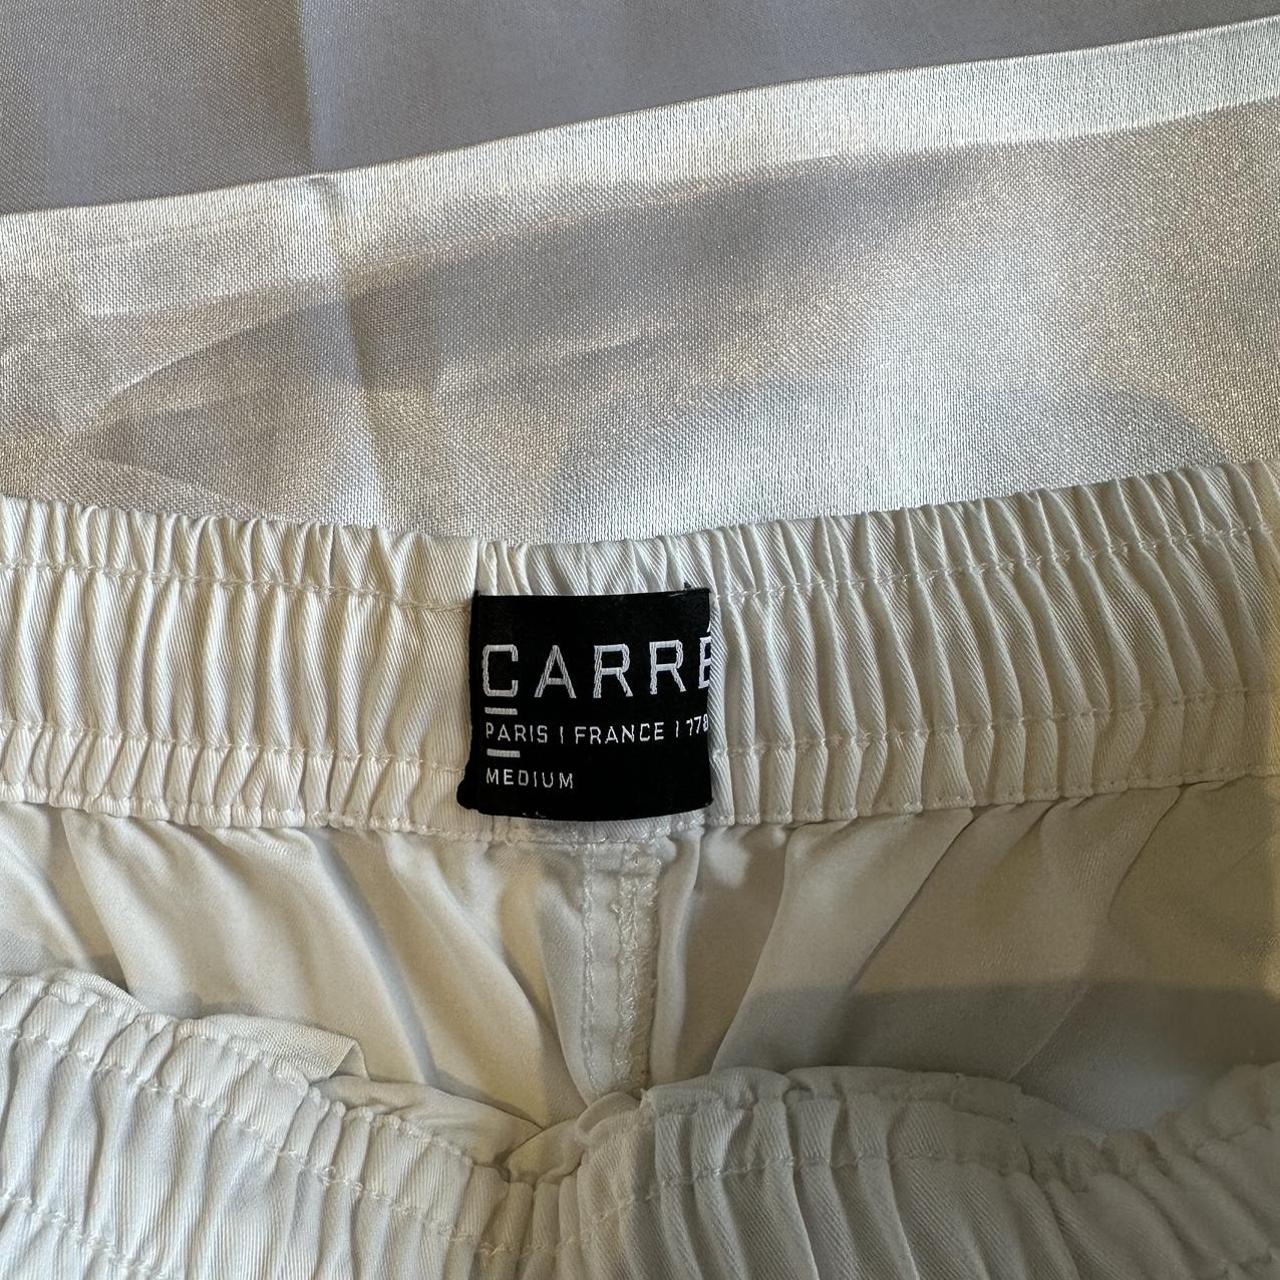 Carre men’s shorts. Some marks on one side as shown... - Depop